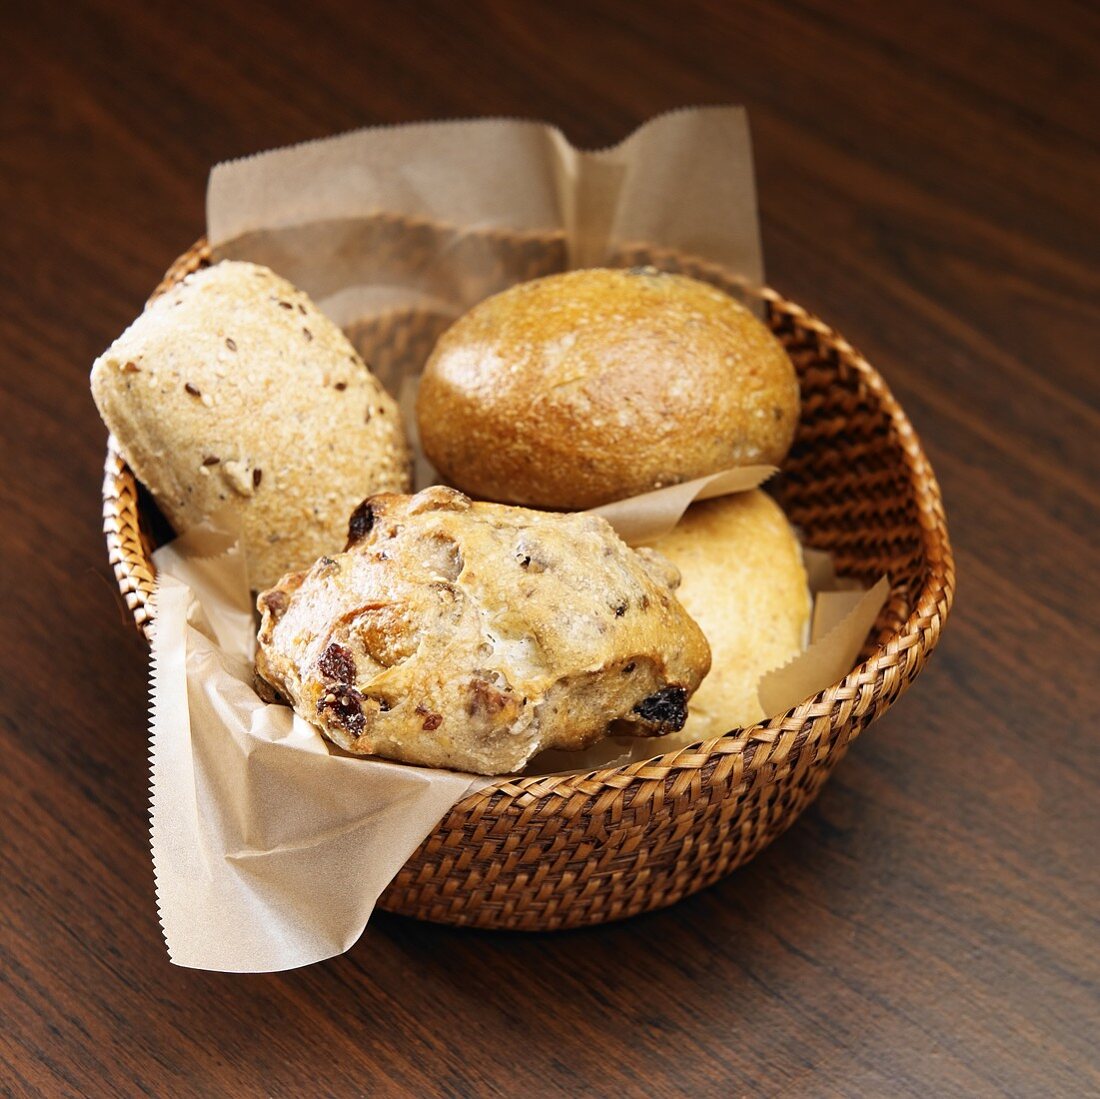 Variety of Rolls in a Basket; Olive, Pecan Raisin and Sourdough